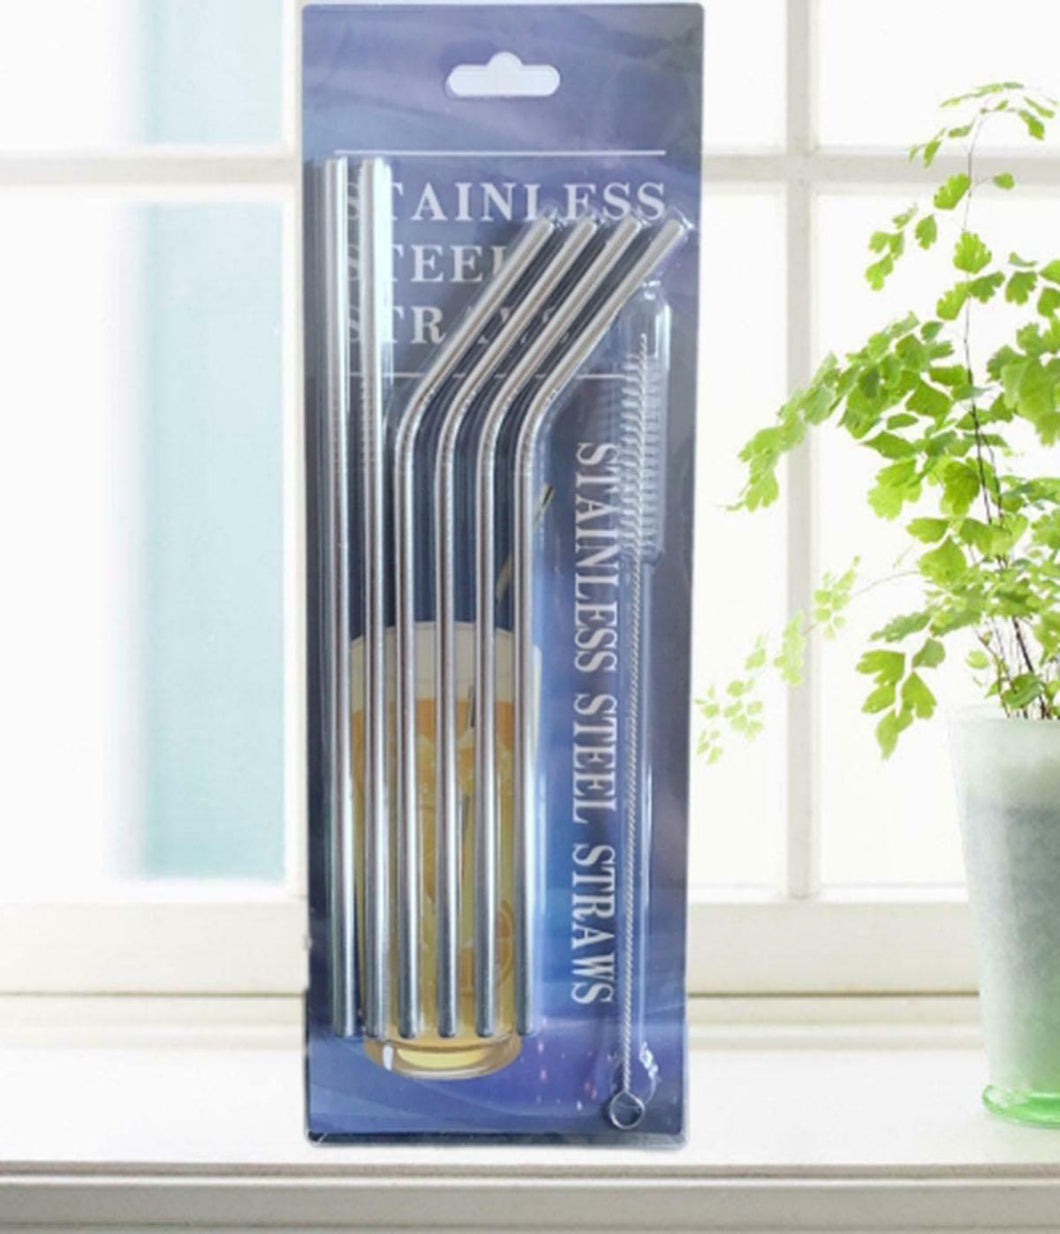 New Stainless Steel Reusable Straw Sets for Cocktail & Drinks